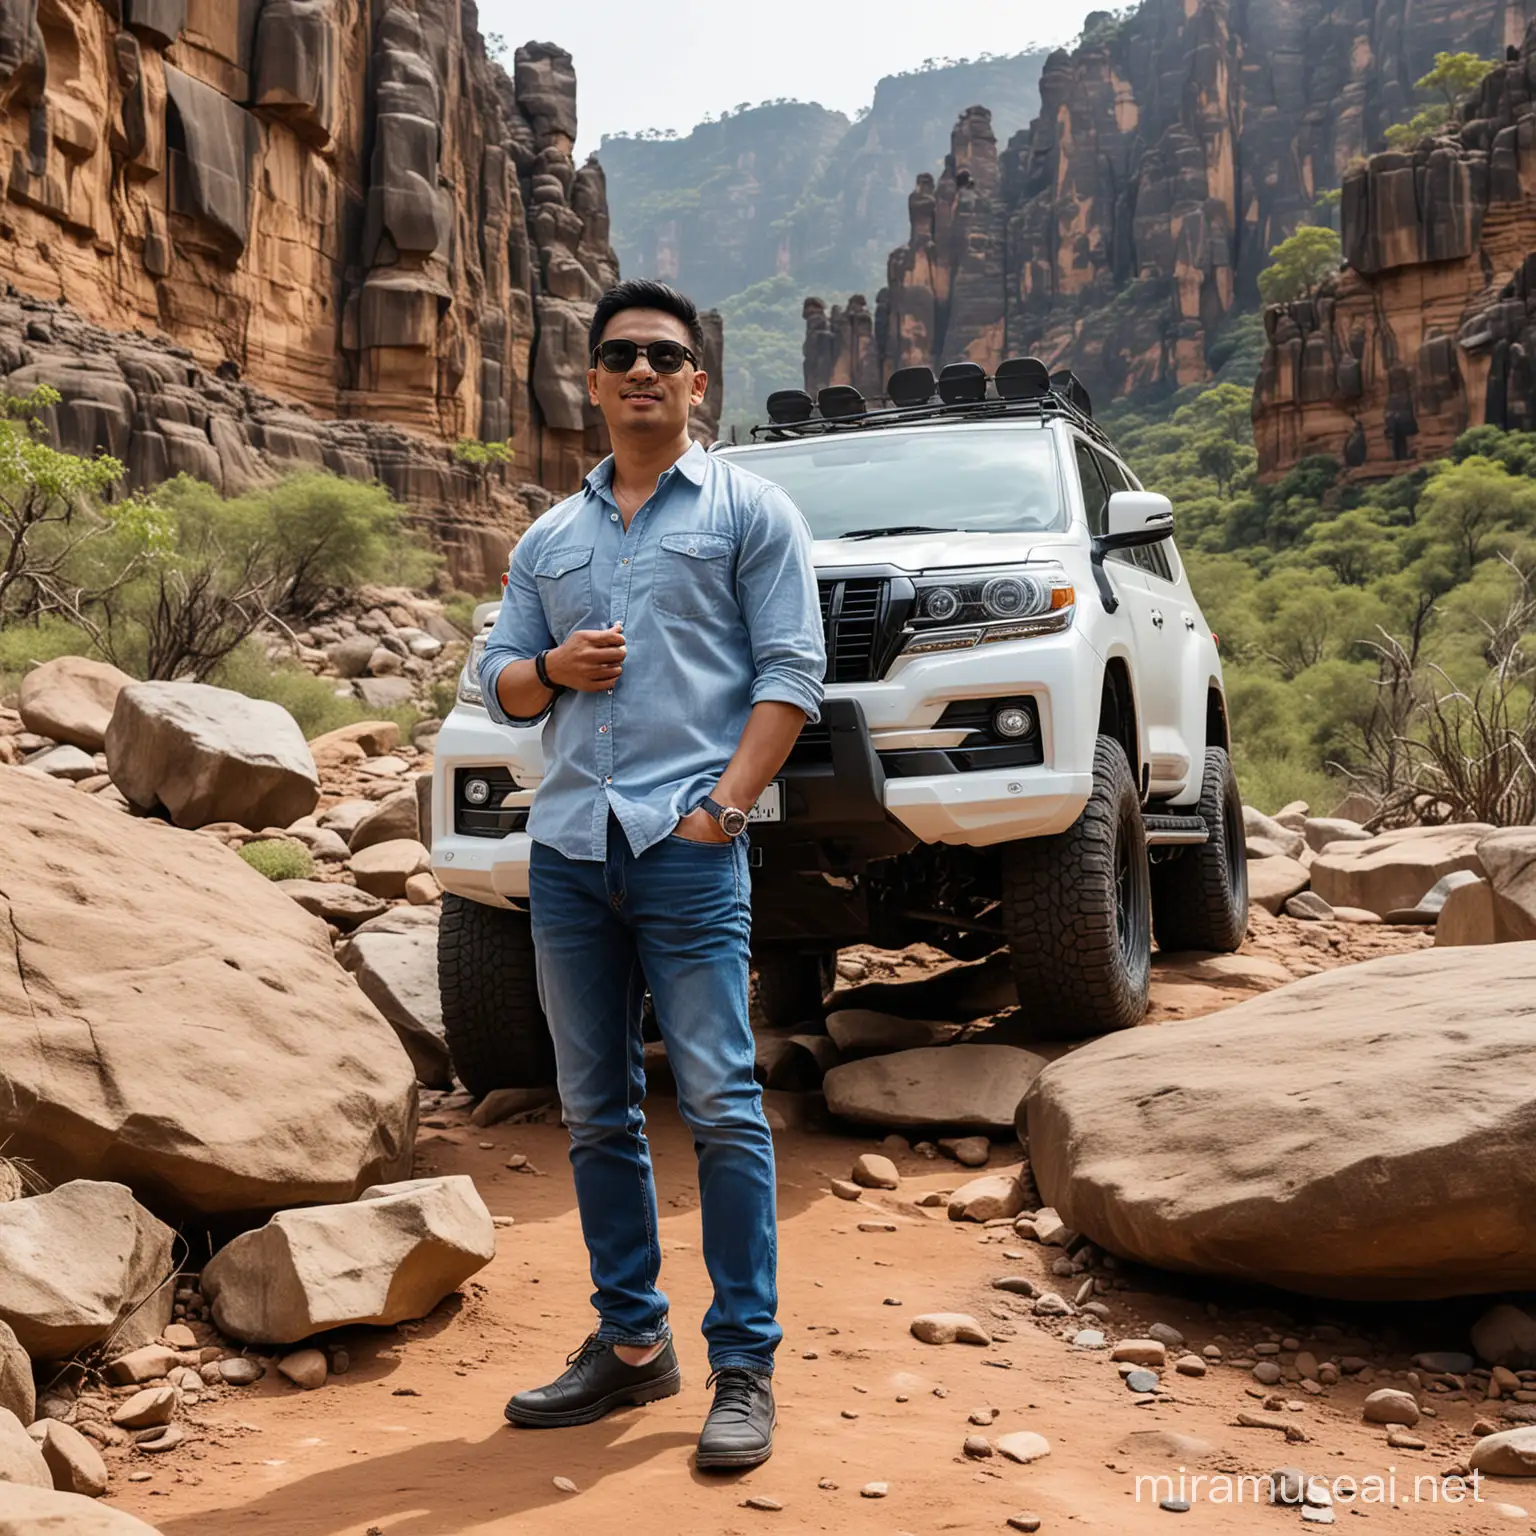 An indonesian gentleman with casual shirt and blue jeans with black sport sunglasses. In the behind there is a white car of land cruiser prado with super big tires. Background in the rock hills and big rock around.